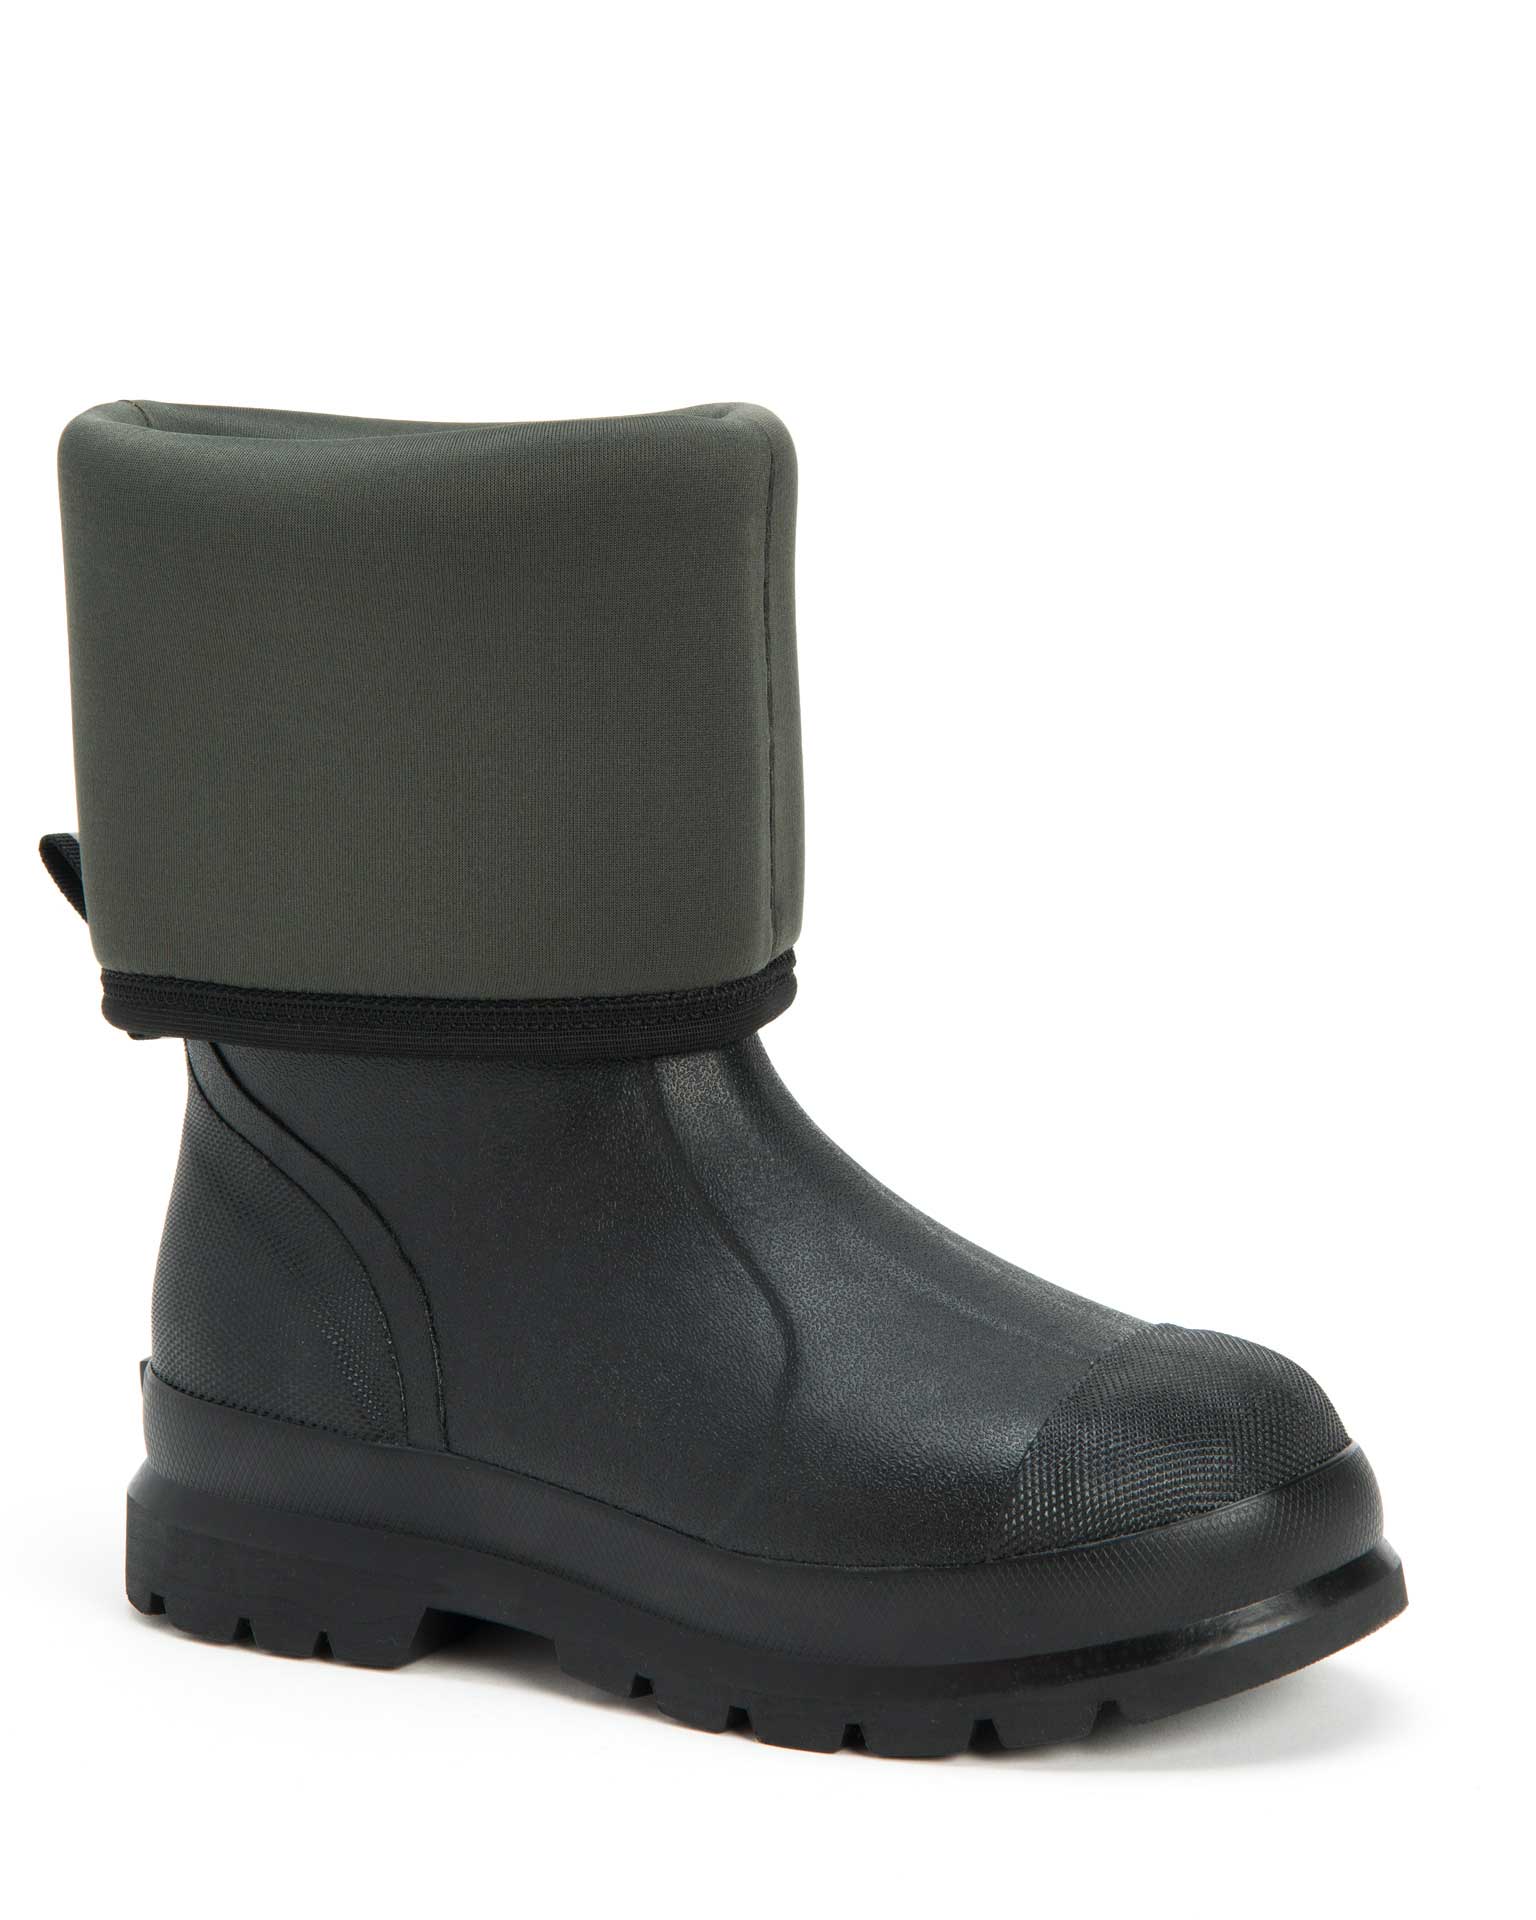 Classic Chore Tall Gumboots